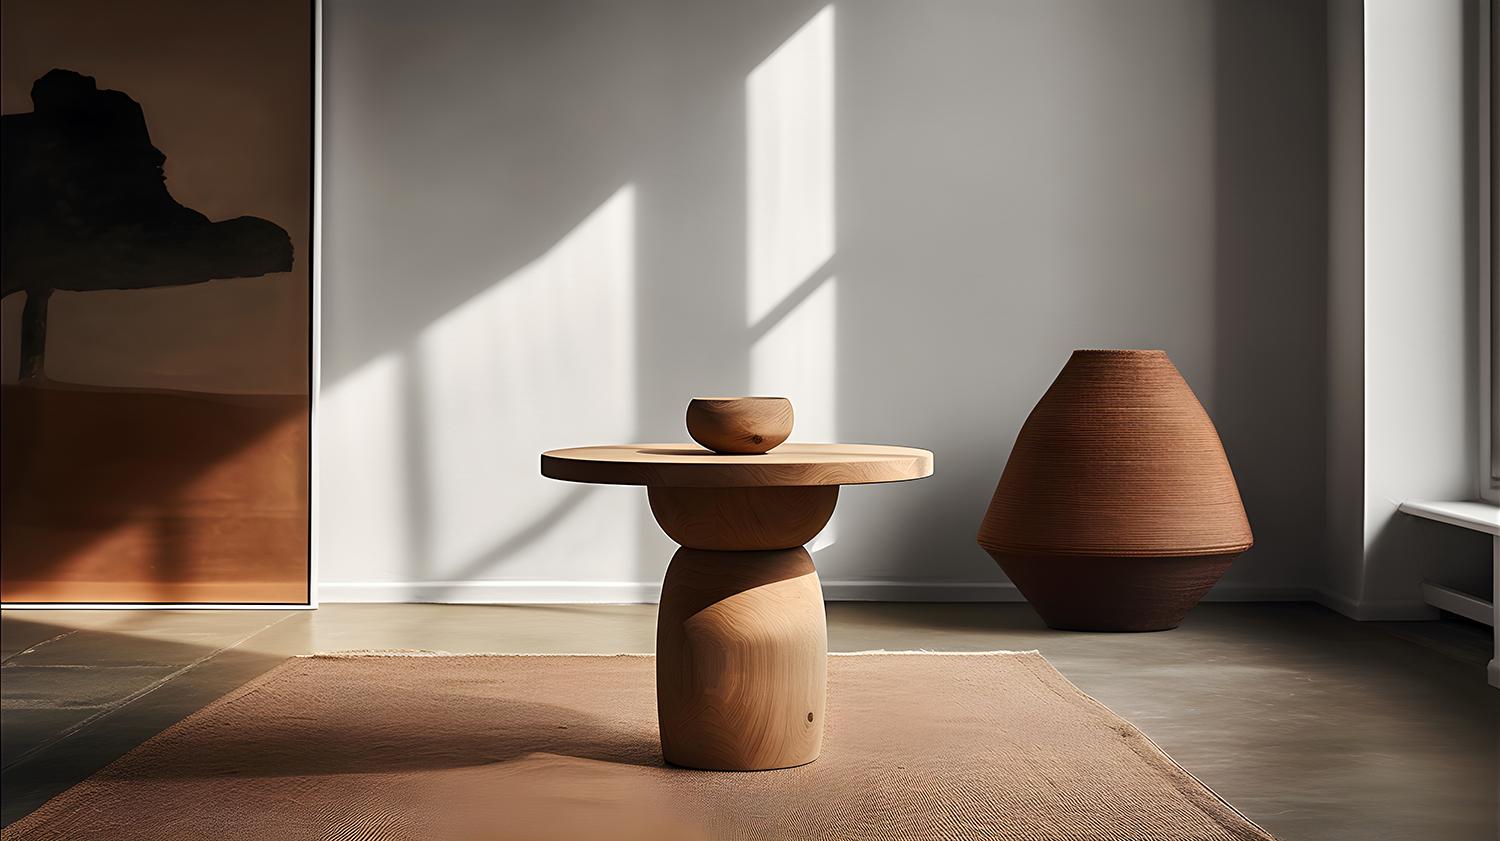 Socle side table, auxiliary table, night stand

Socle is a small solid wood table designed by the NONO design team. Made of solid wood, its elaborated construction serves as a support, much like a plinth for a statue or sculpture.

In the past, the